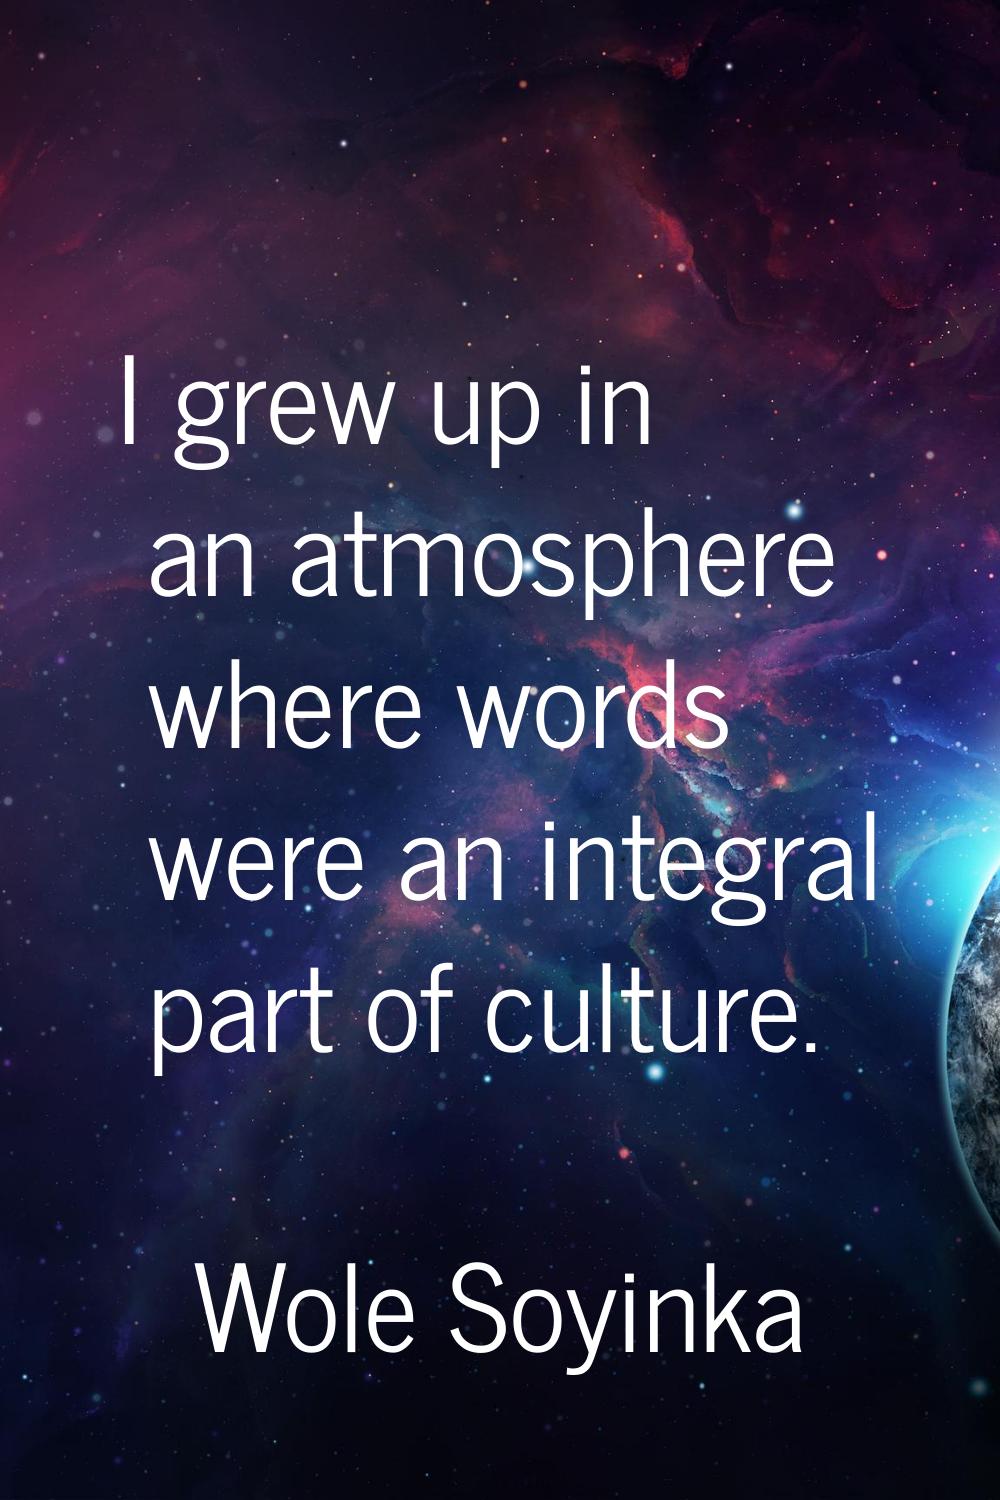 I grew up in an atmosphere where words were an integral part of culture.